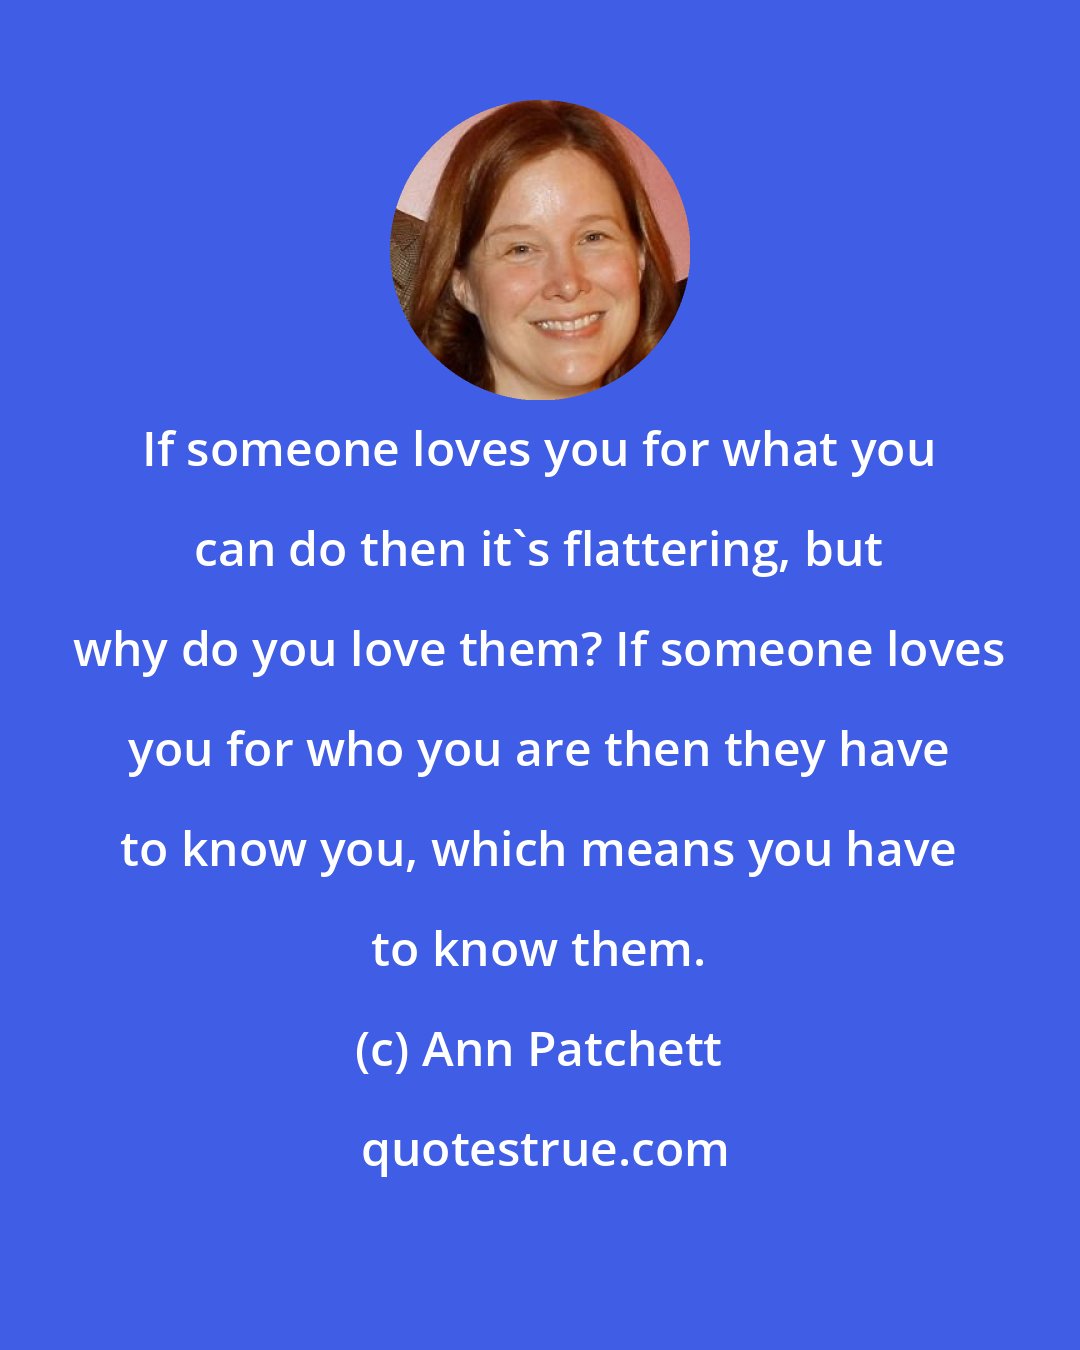 Ann Patchett: If someone loves you for what you can do then it's flattering, but why do you love them? If someone loves you for who you are then they have to know you, which means you have to know them.